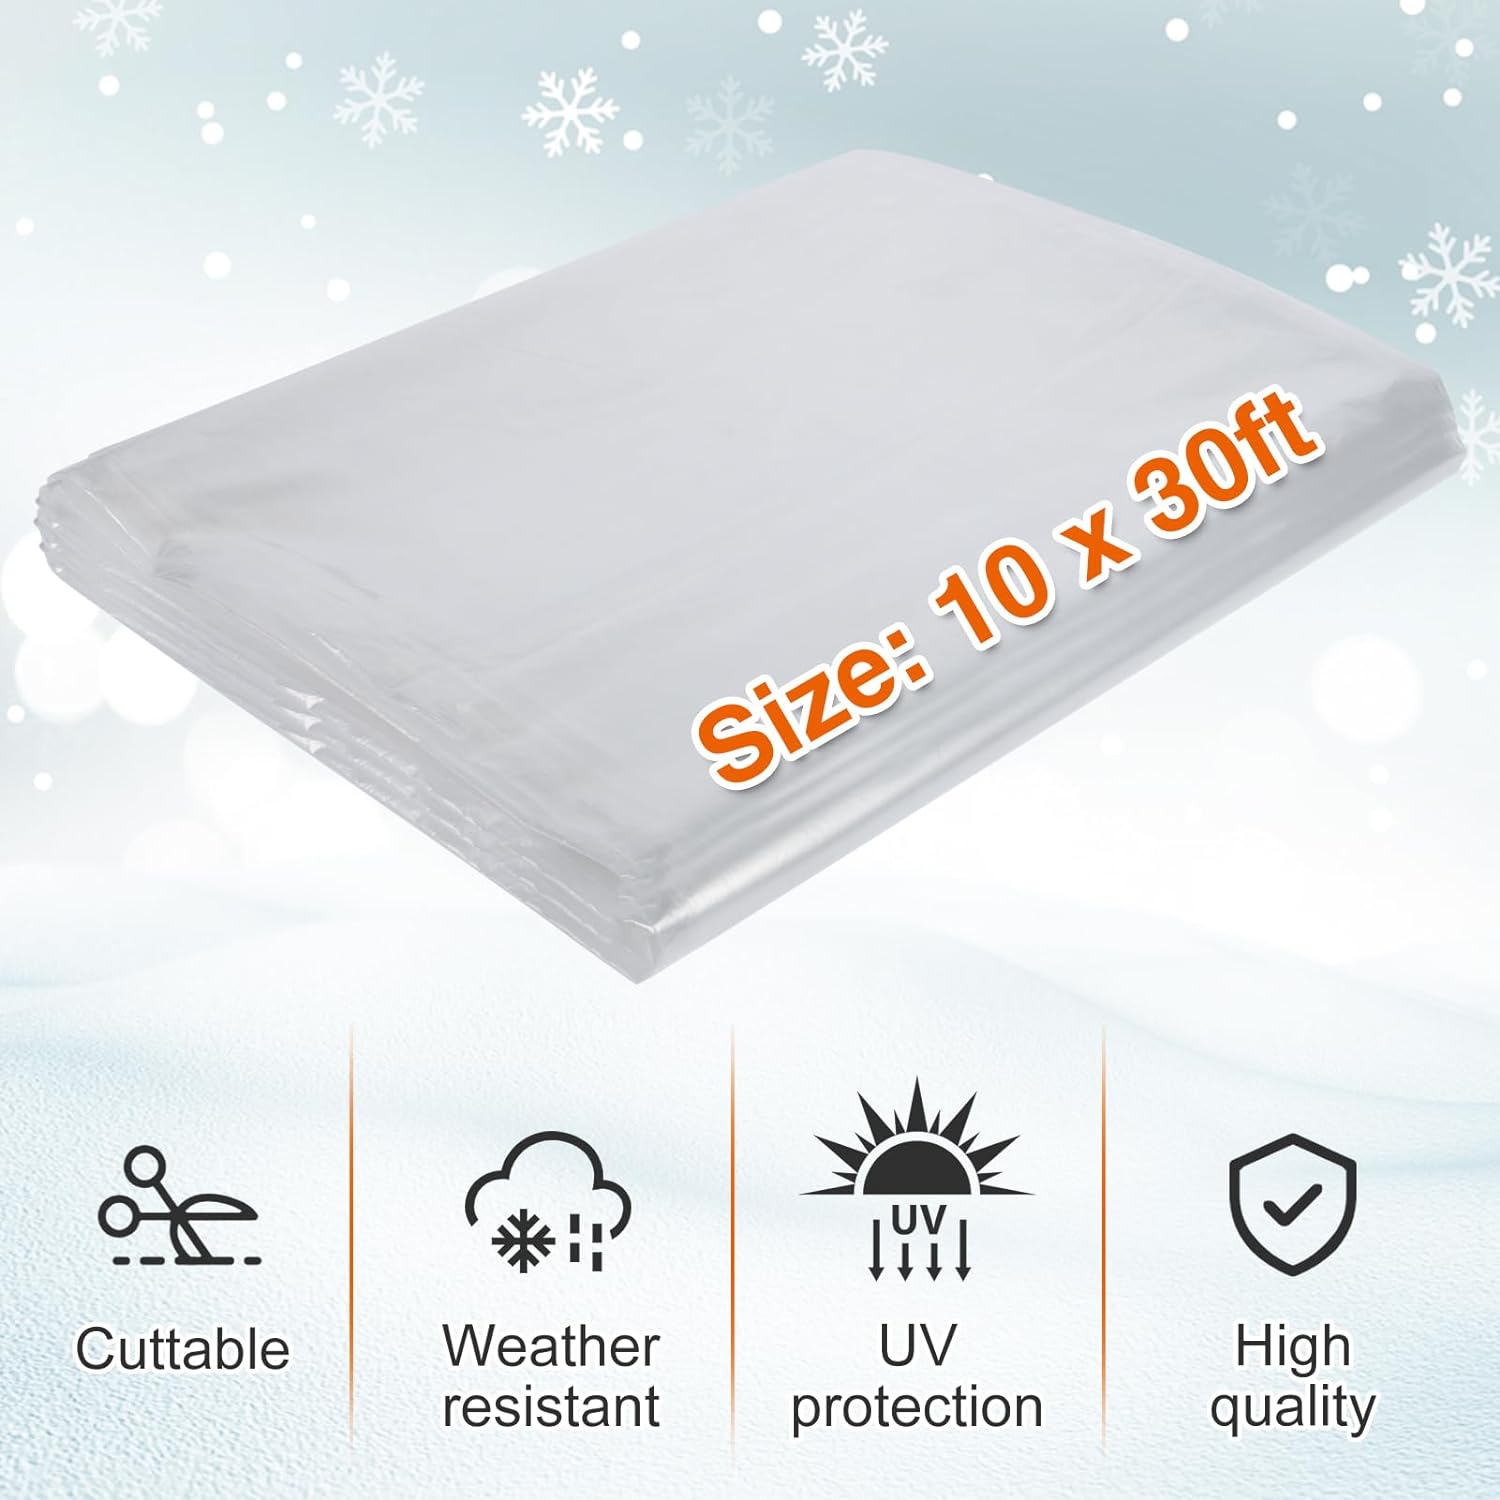 Plant Covers Freeze Protection, 10 x 30ft Durable Plastic Frost Blanket for Winter Rain Snow Weather, Clear Waterproof Floating Row Cover for Outdoors Garden Plants Vegetables Crops (6 Mil Thickness)